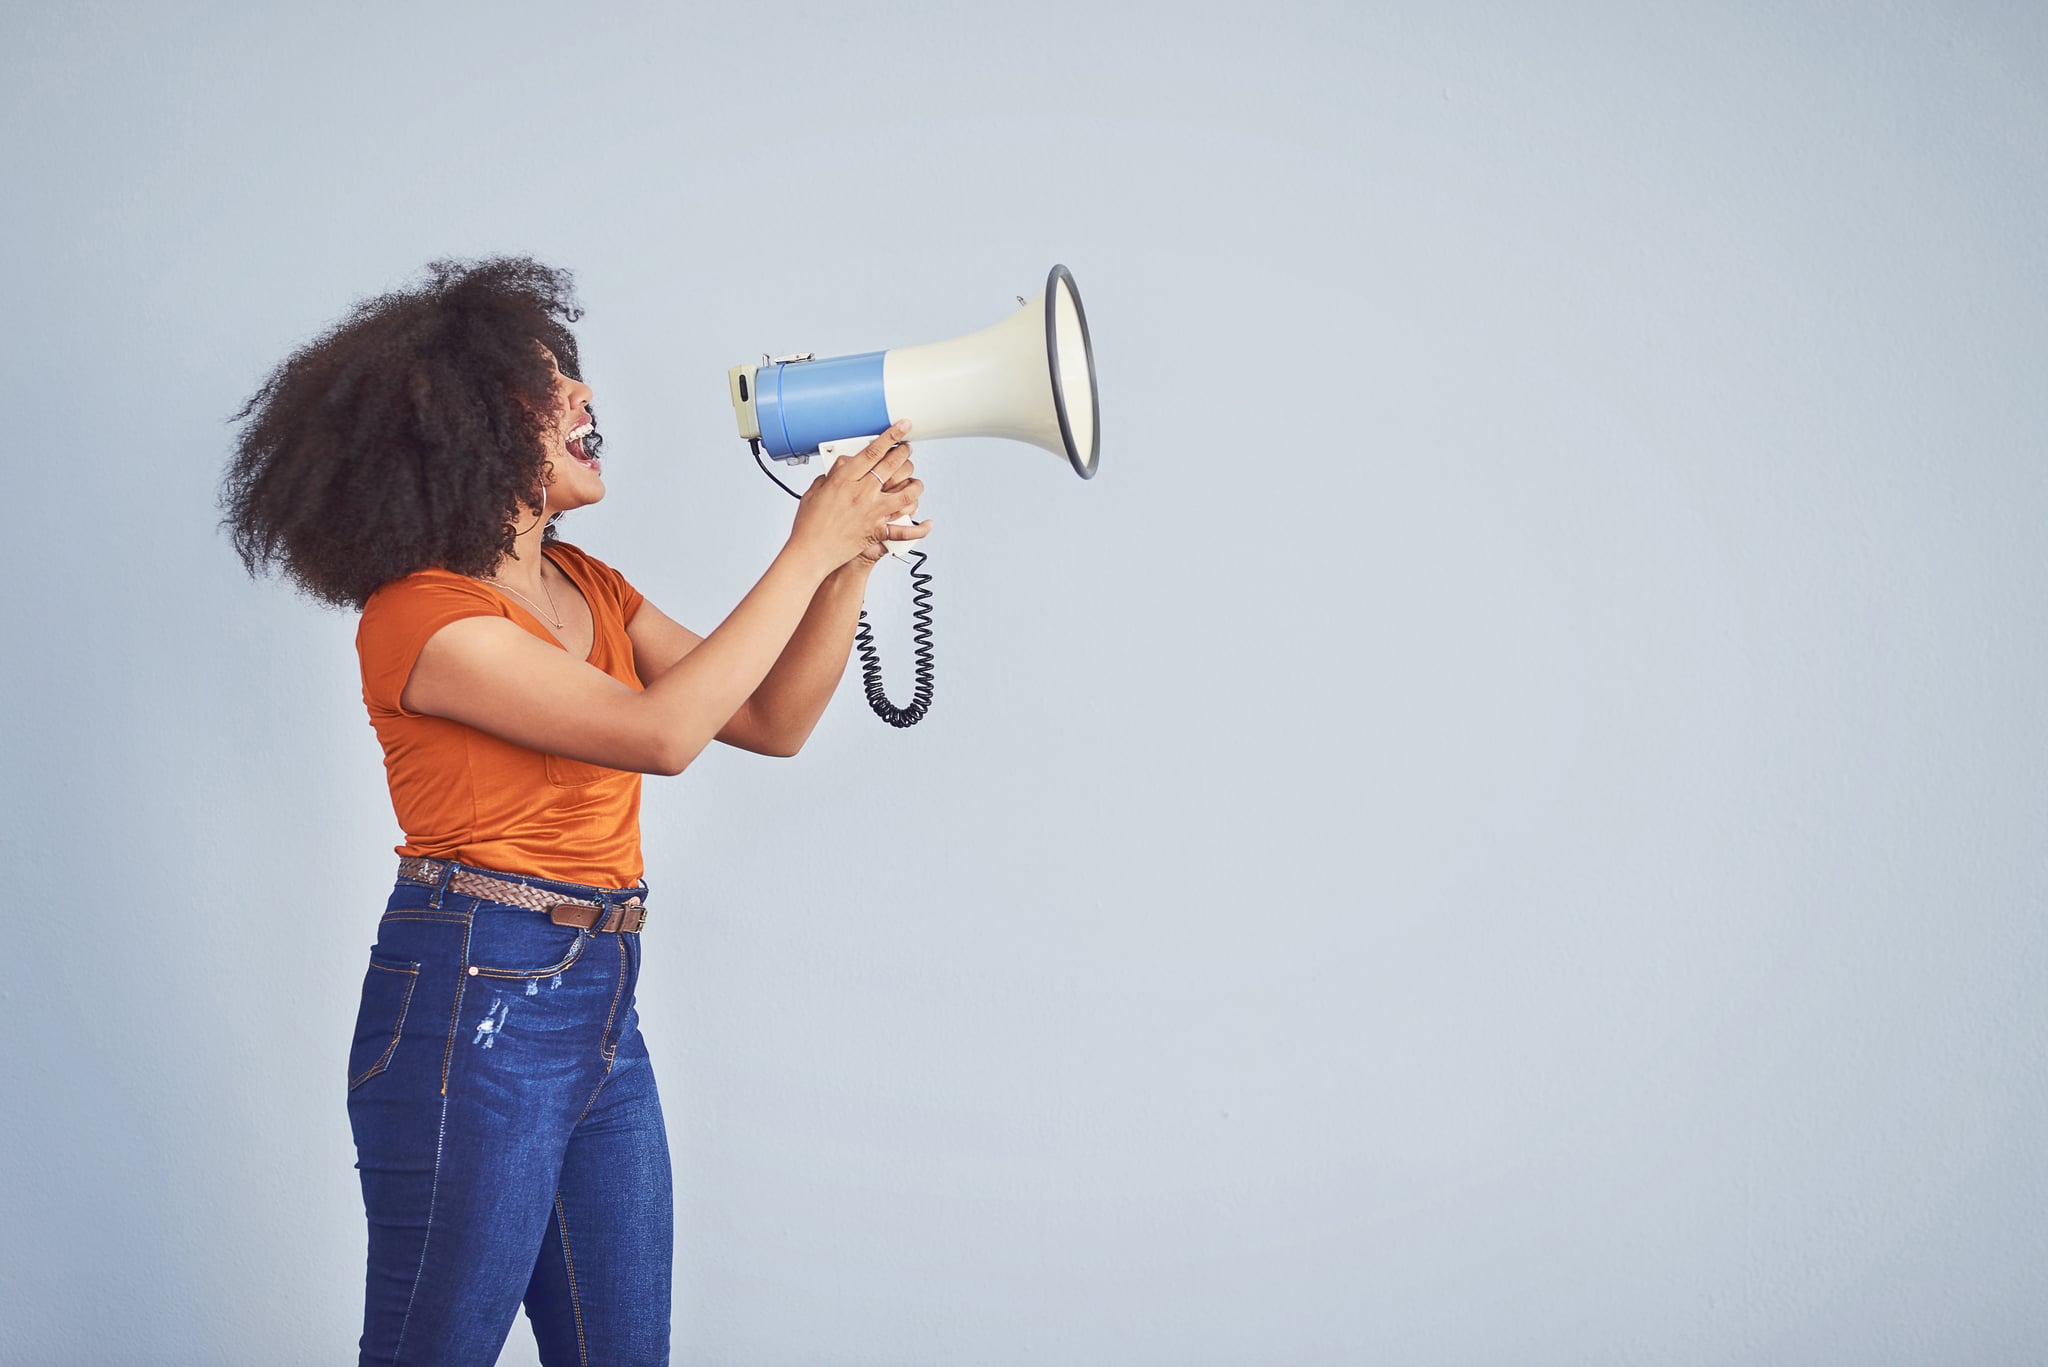 Studio shot of a young woman using a megaphone against a gray background